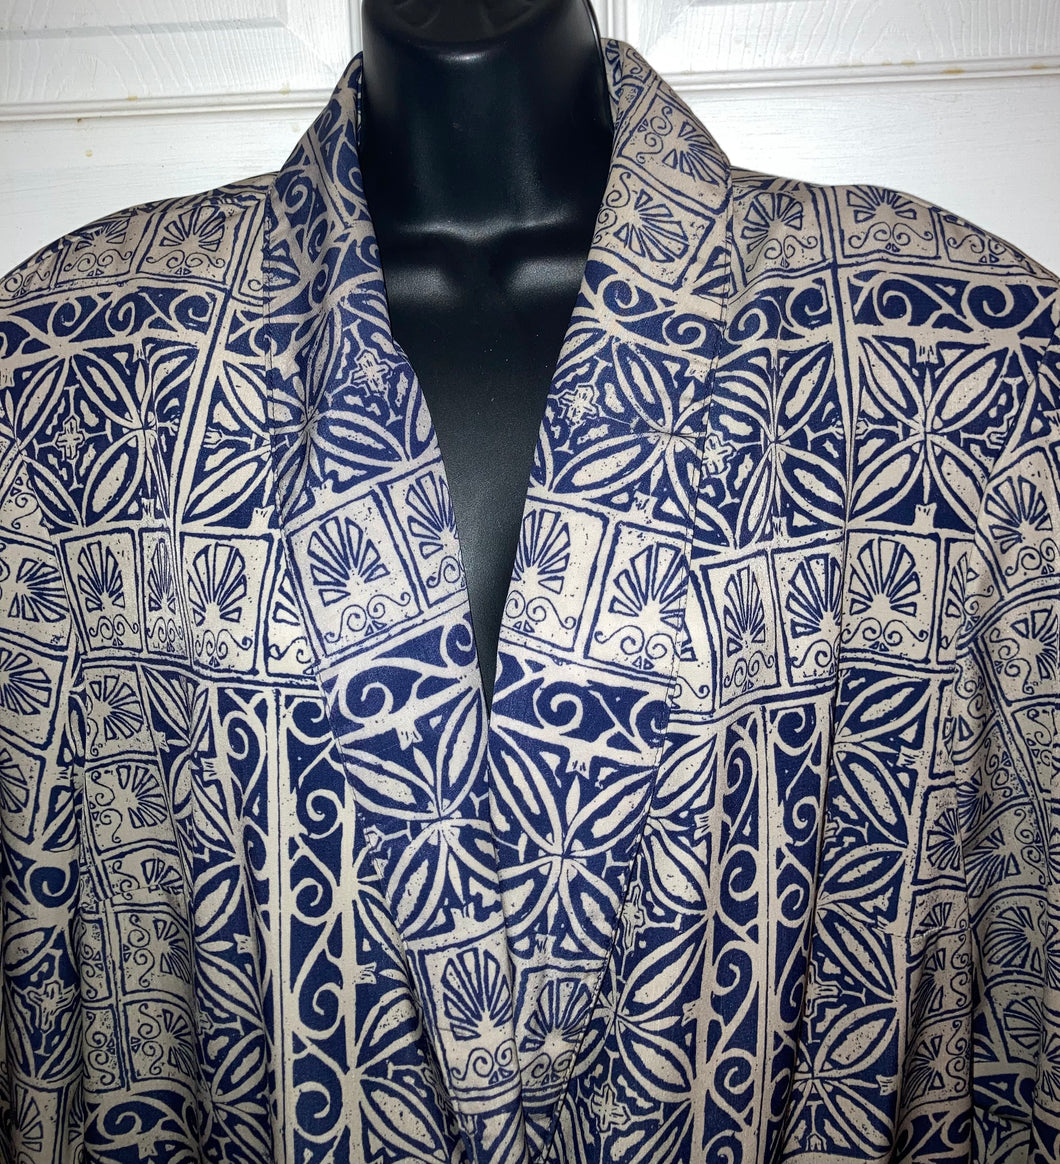 Bedford Fair Lifestyles Vintage Women's Blazer Plus Size 20W Made in USA RN 88744 Padded Shoulders